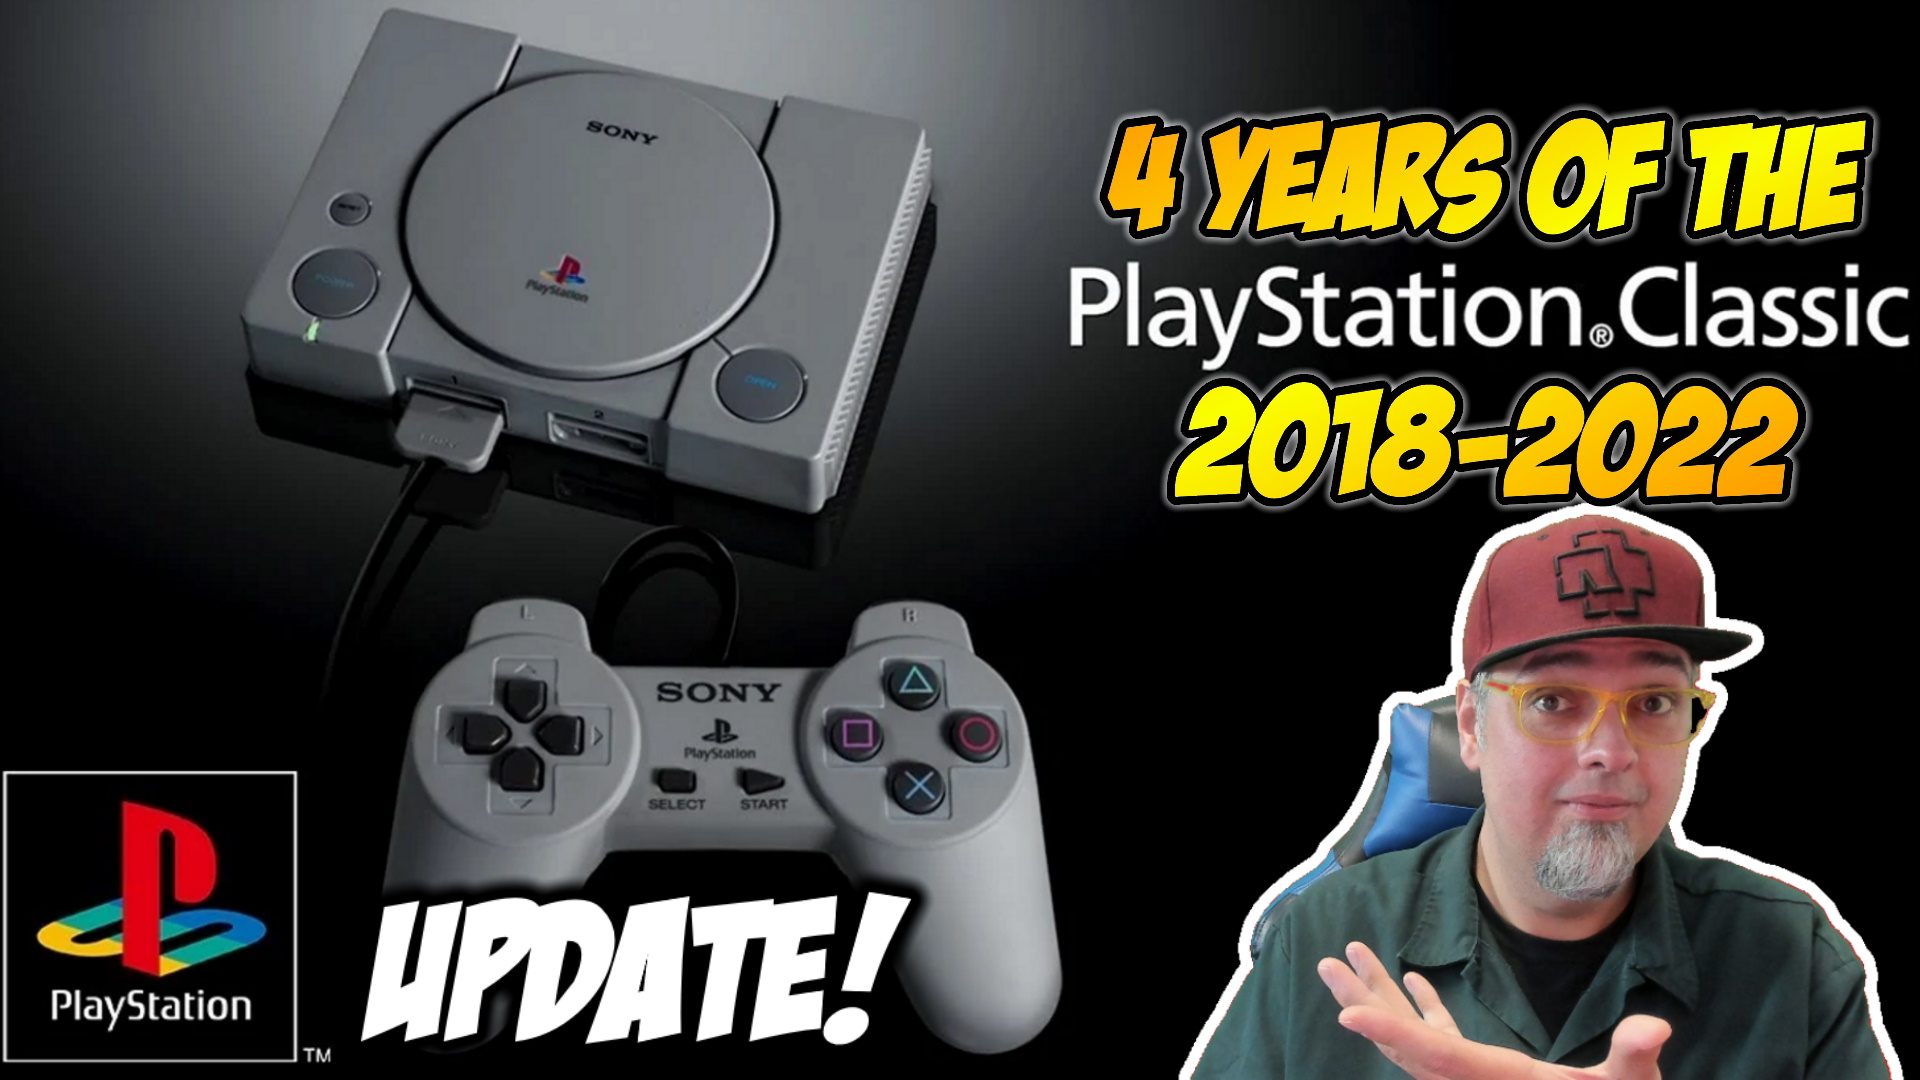 Mad 🥒 on Twitter: "Its going on 4 years since Sony released the PlayStation Classic... and it is now better than one of my mini classic consoles.. and